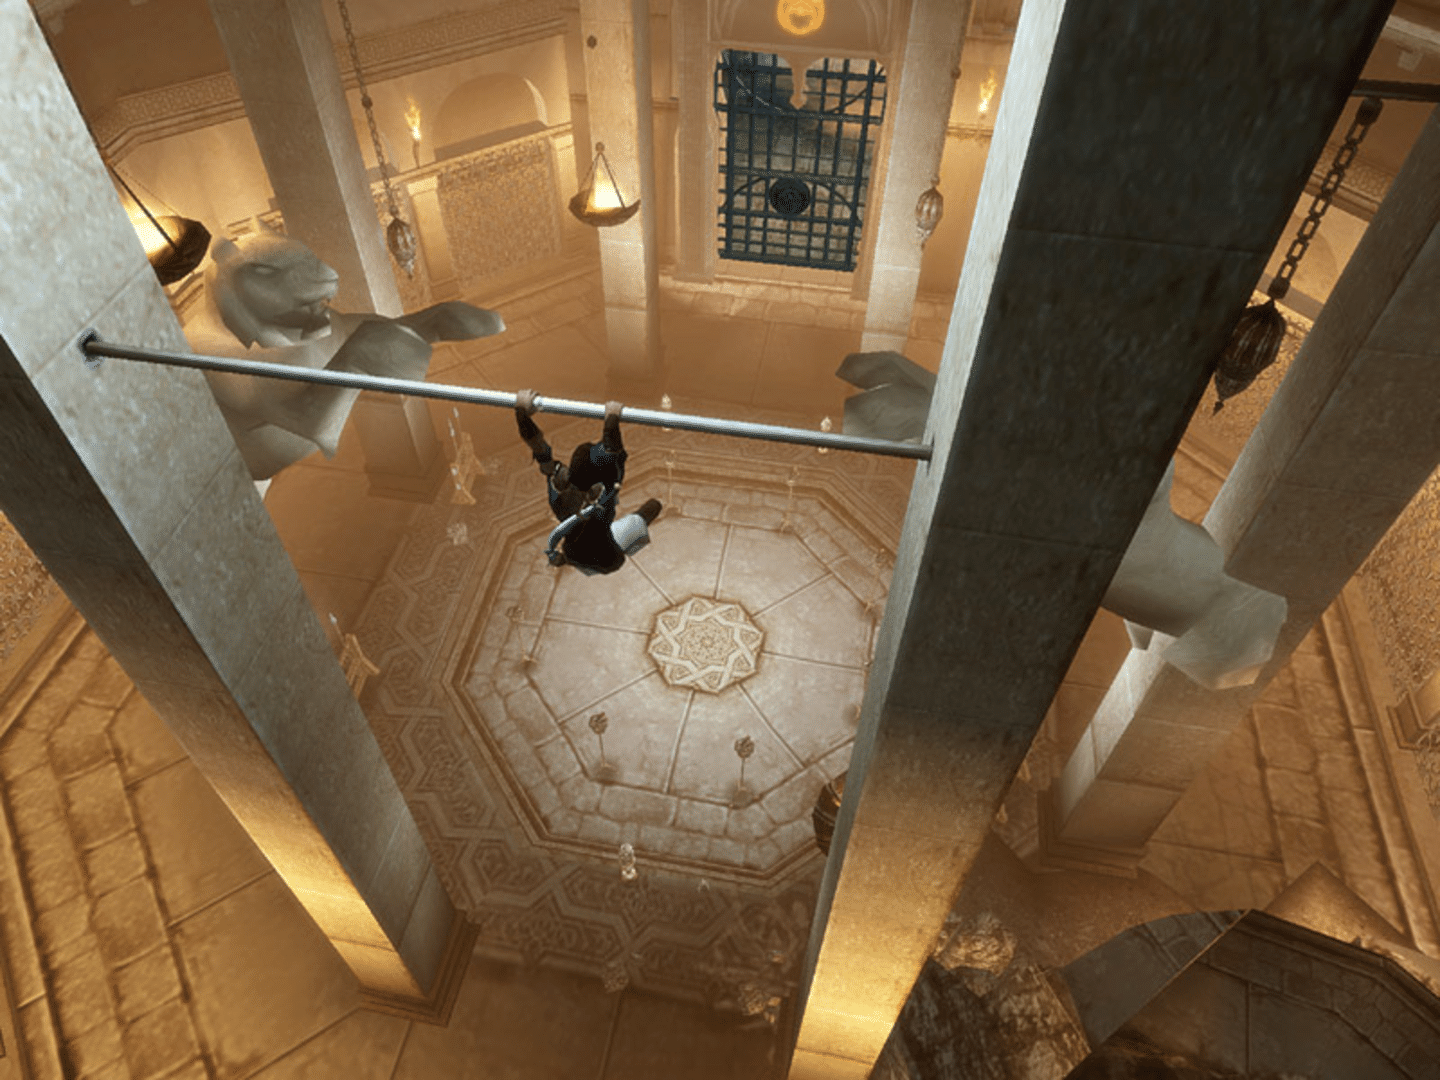 Prince of Persia: The Sands of Time screenshot